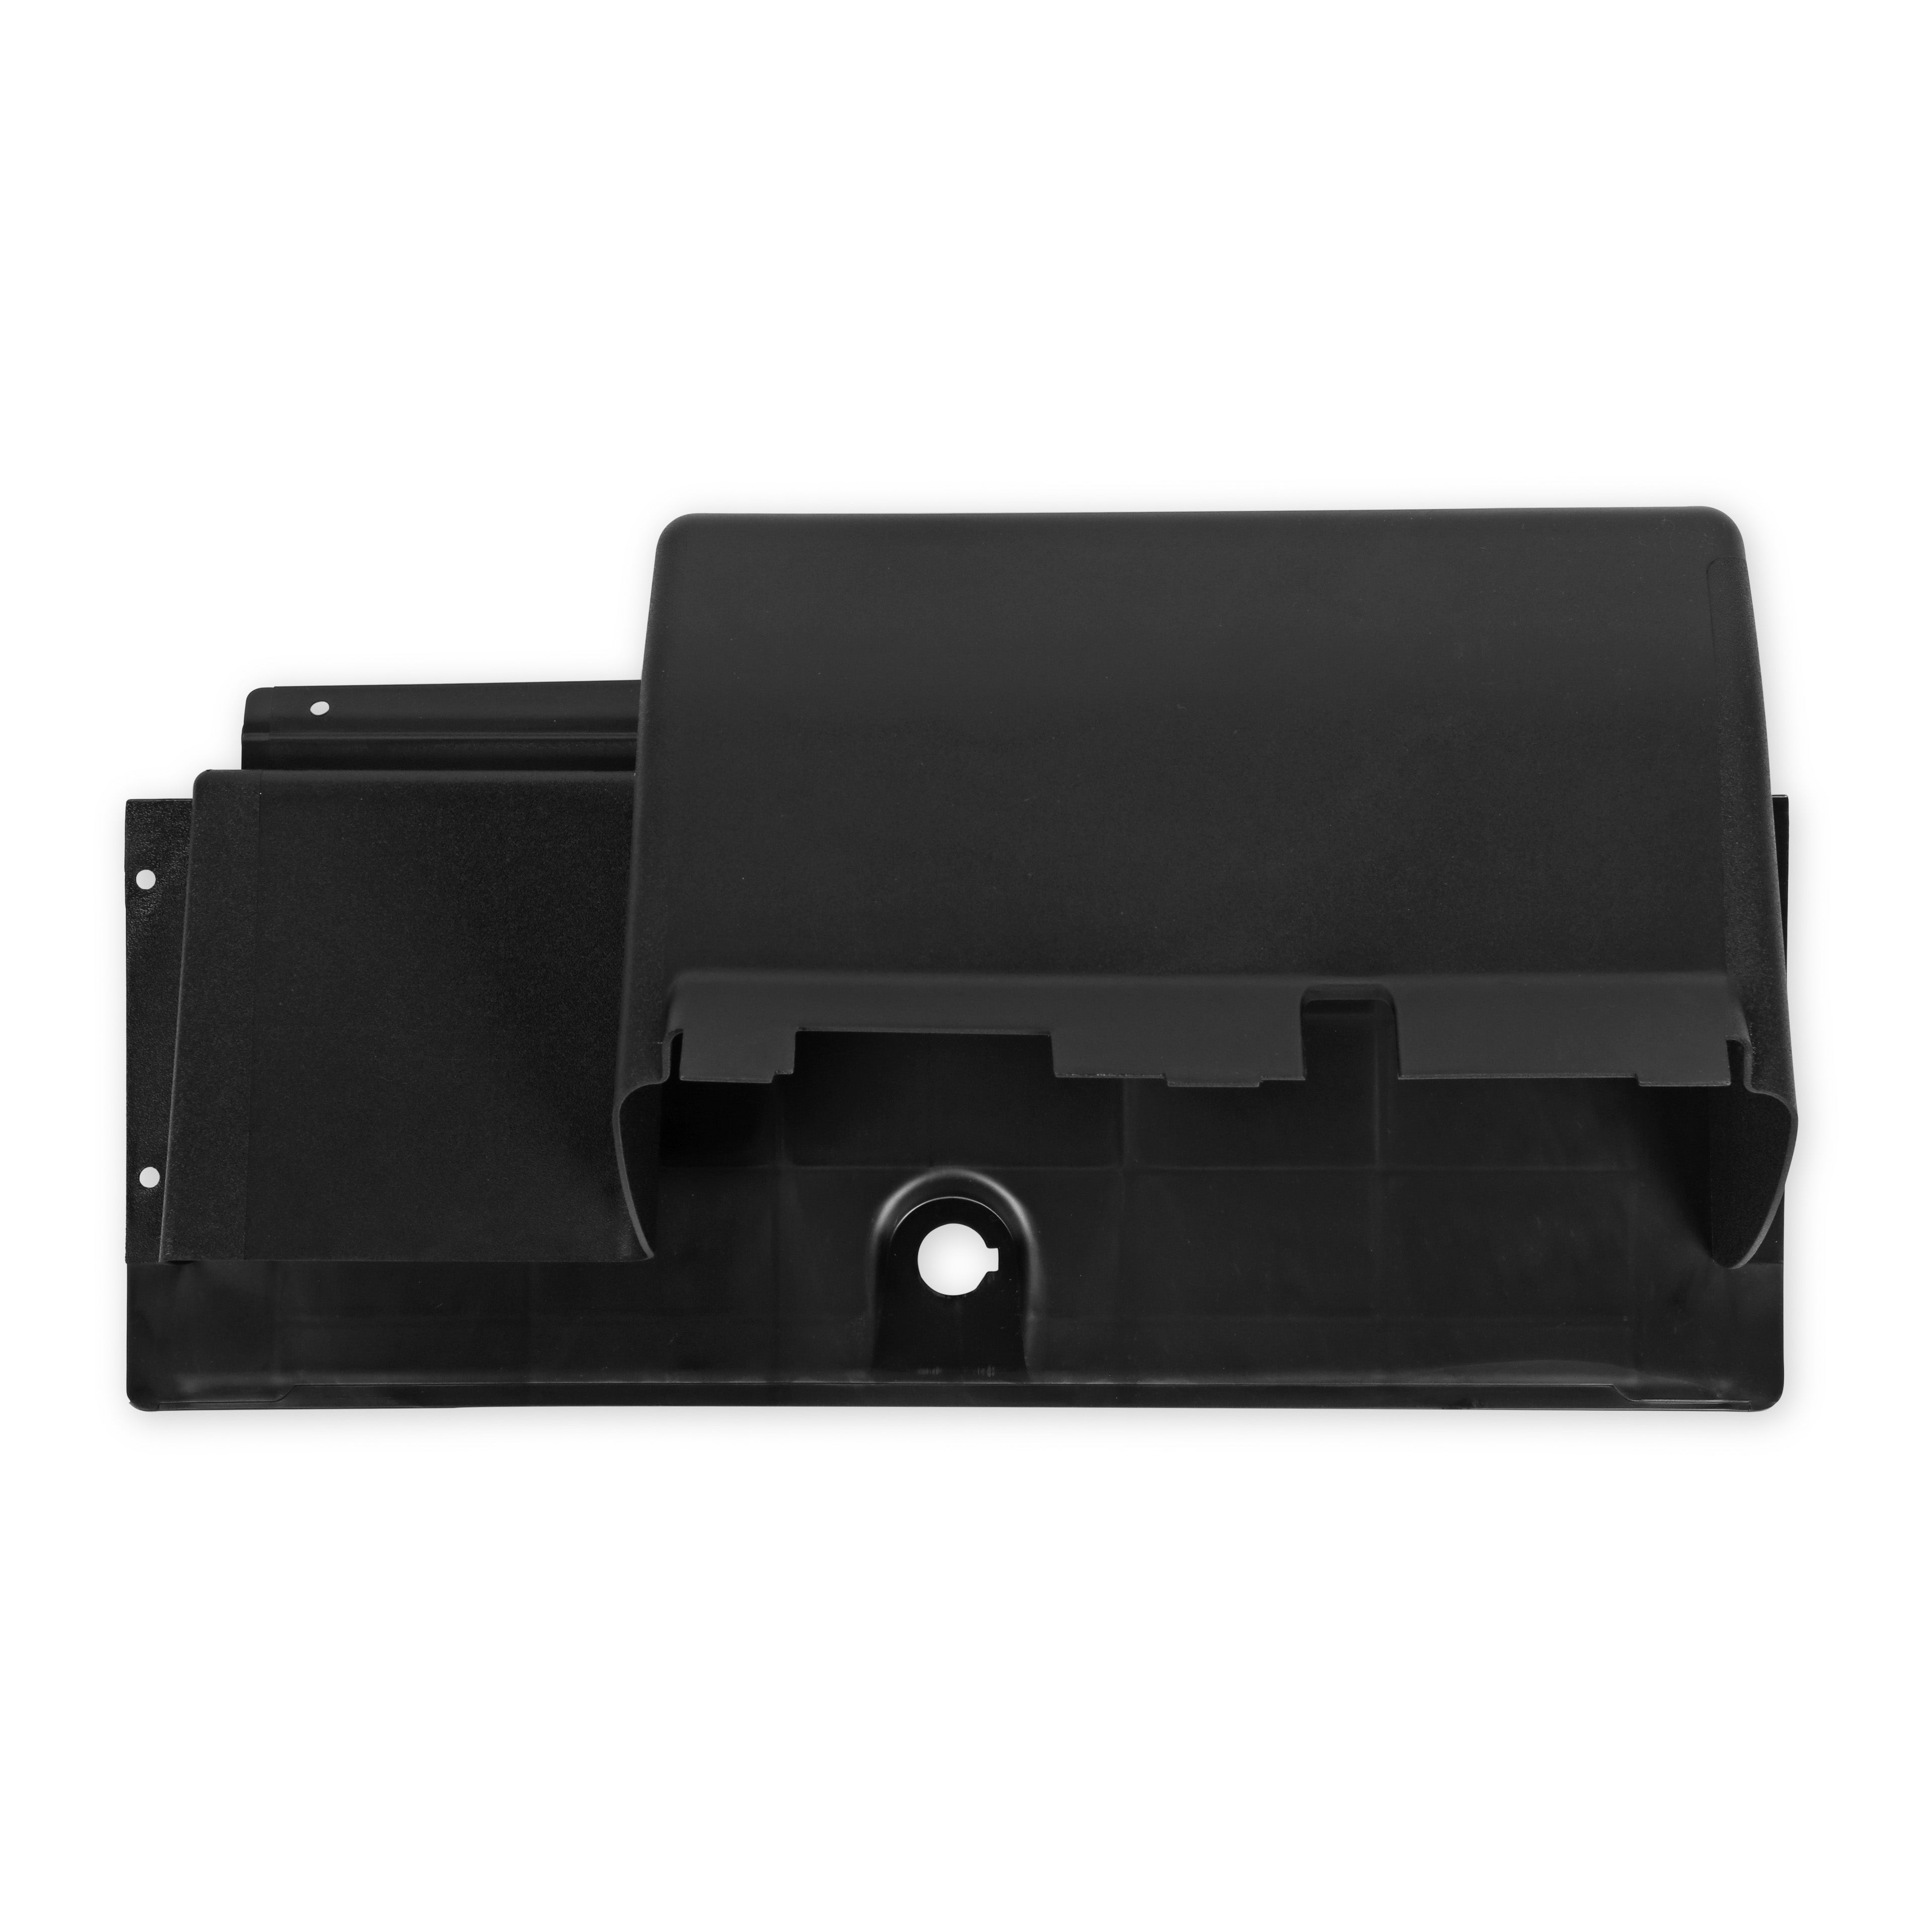 BROTHERS C/K Glove Box - With A/C pn 05-177